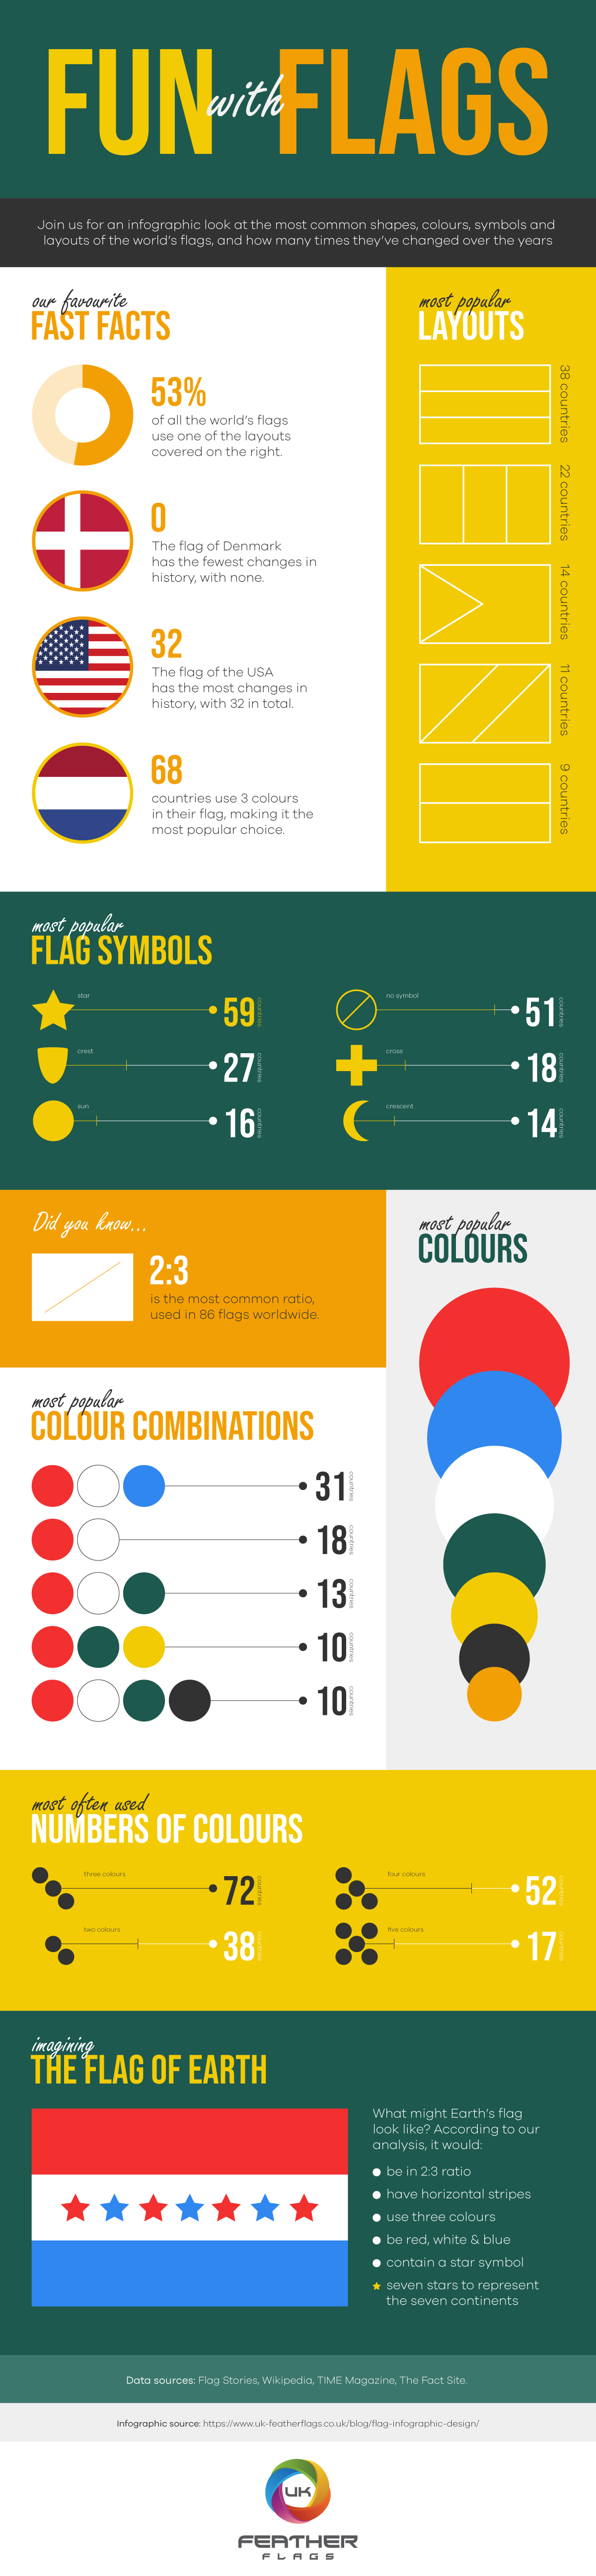 Fun With Flags - Infographic